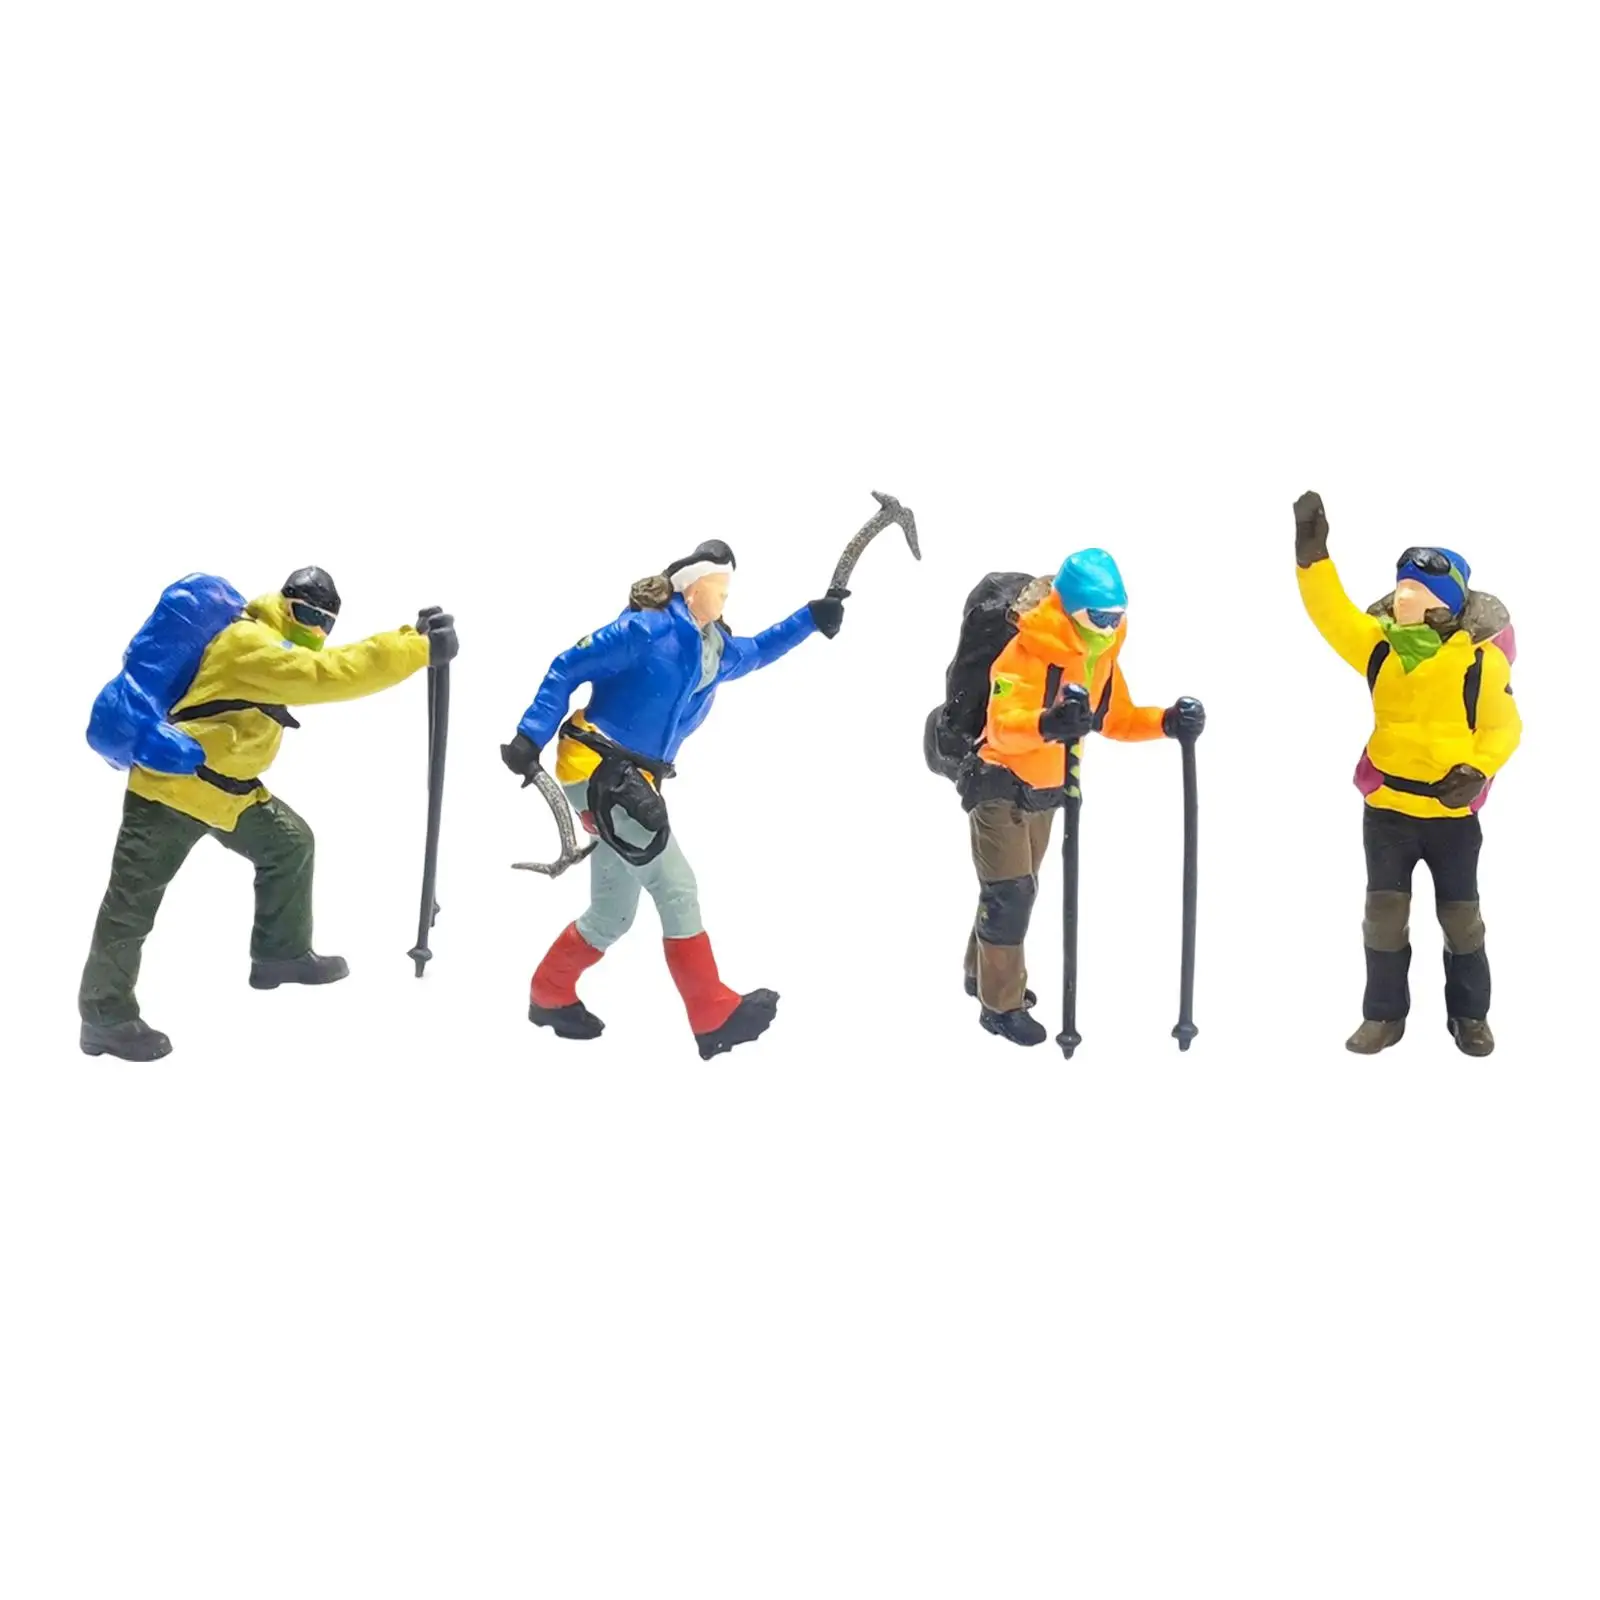 1/64 Climbing People Figurines Tiny People Miniature People Model for Layout